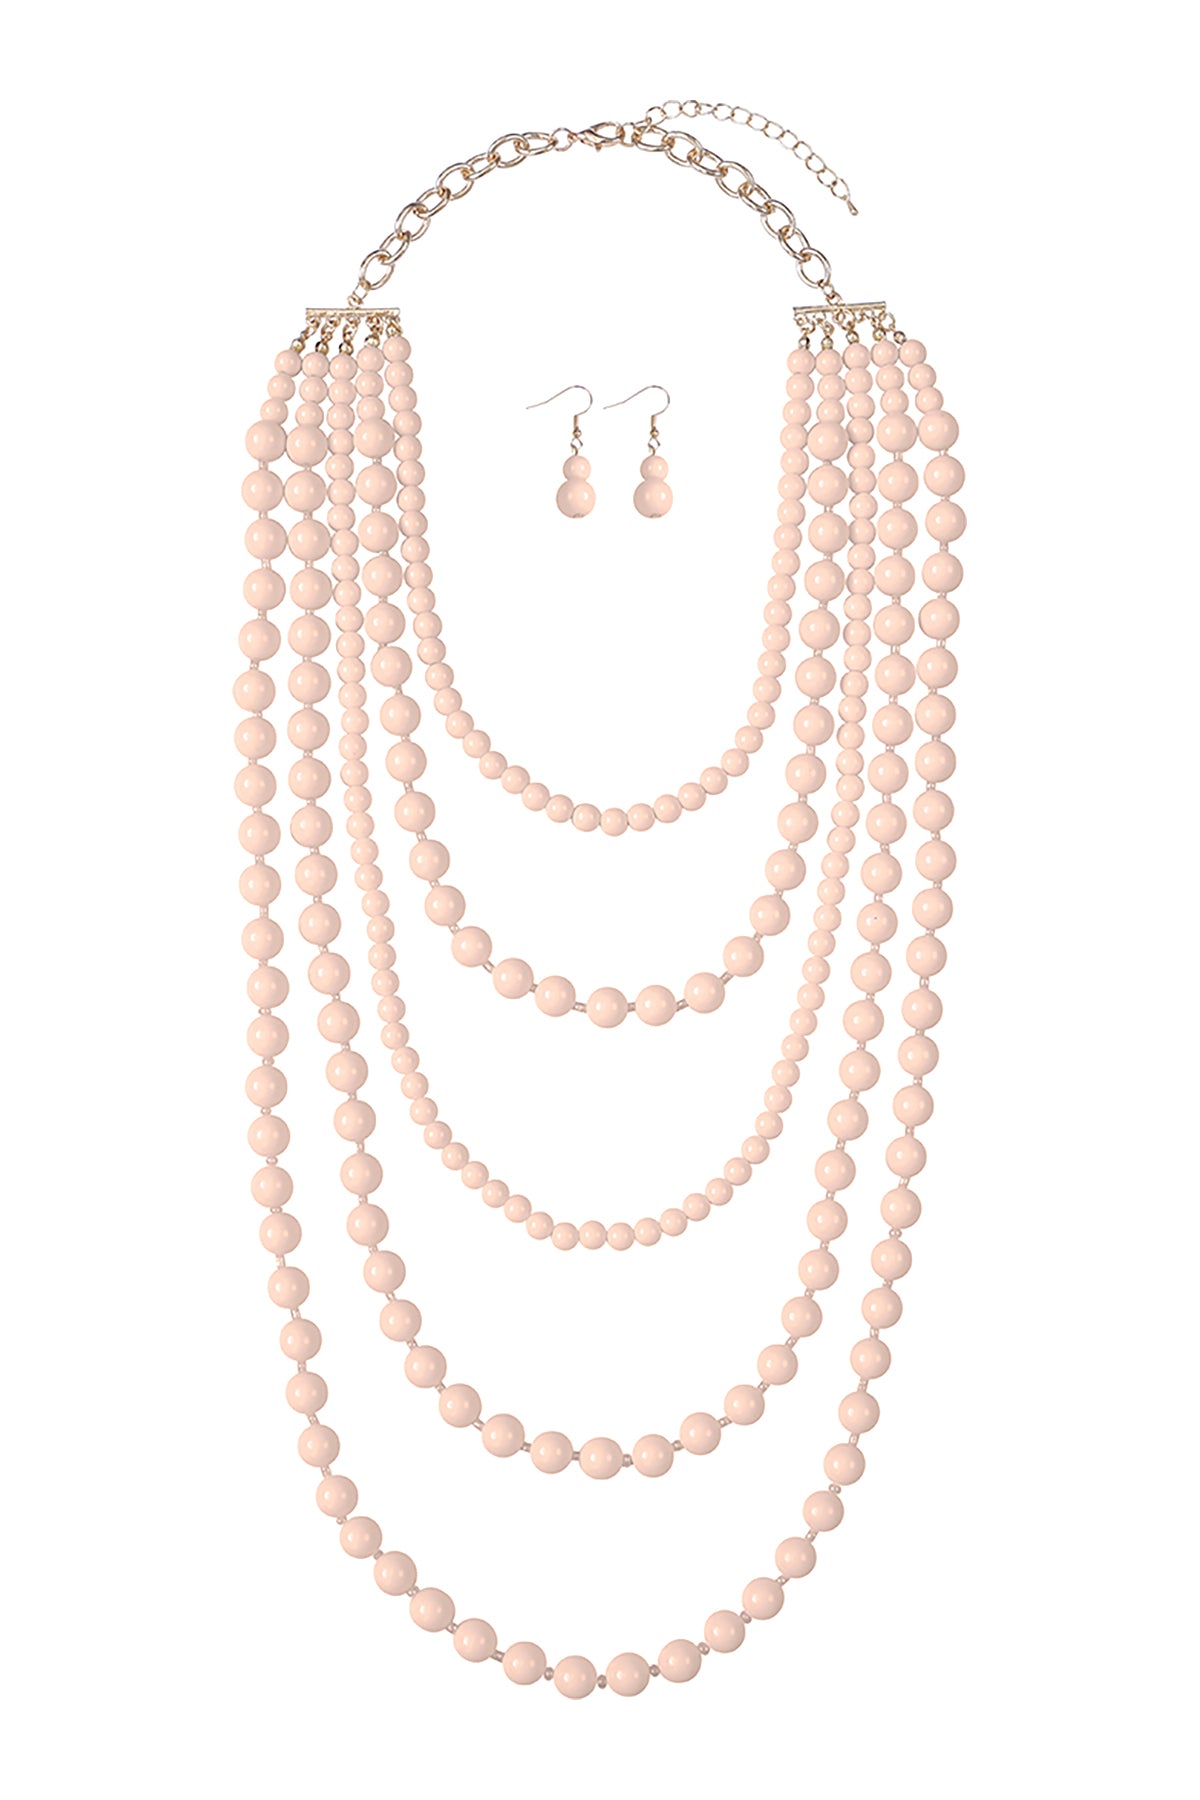 MULTILAYERED BEADS NECKLACE AND EARRINGS SET